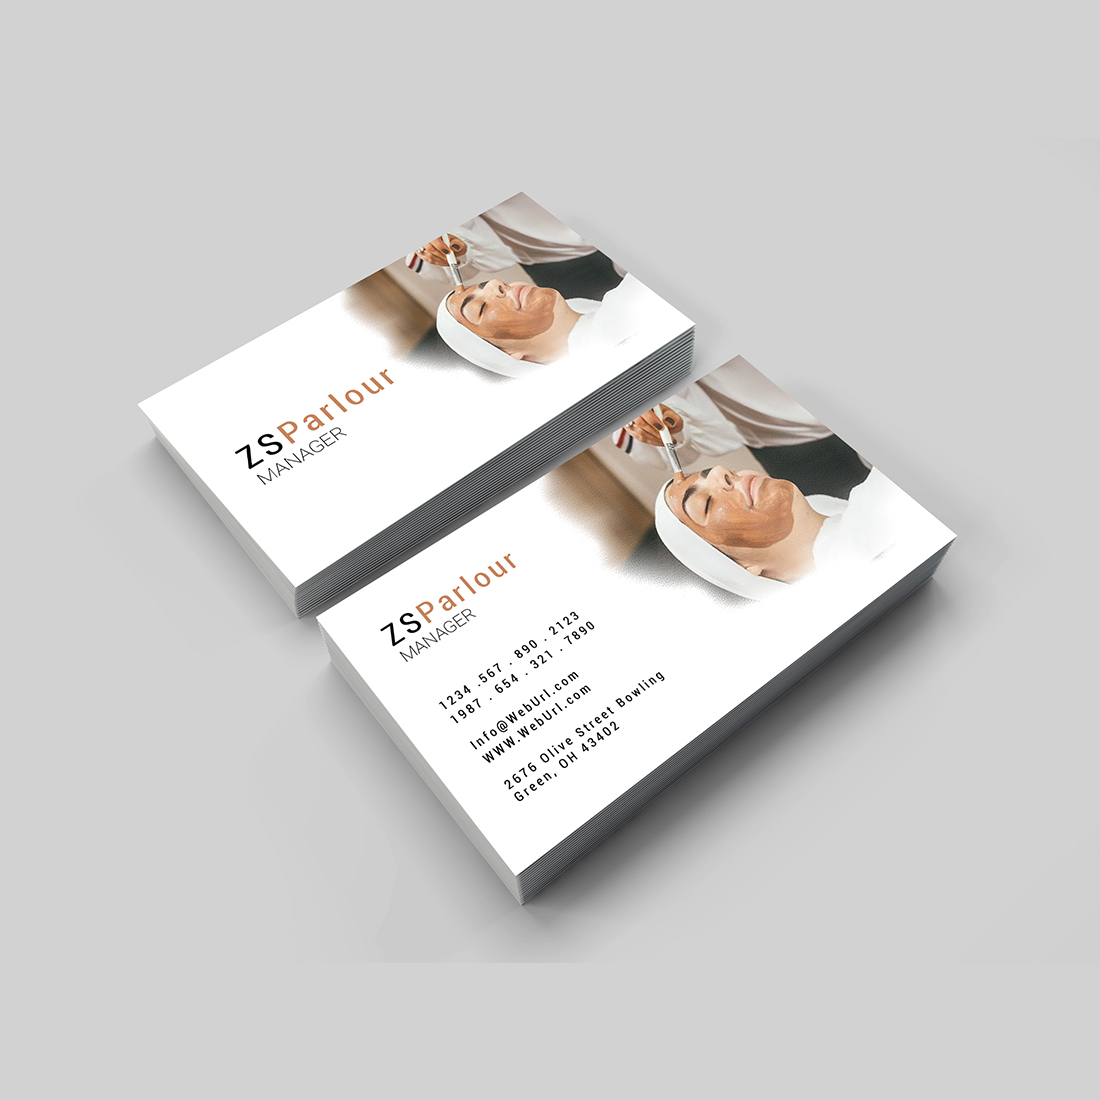 Parlour ( Simple and professional ) Business card design cover image.